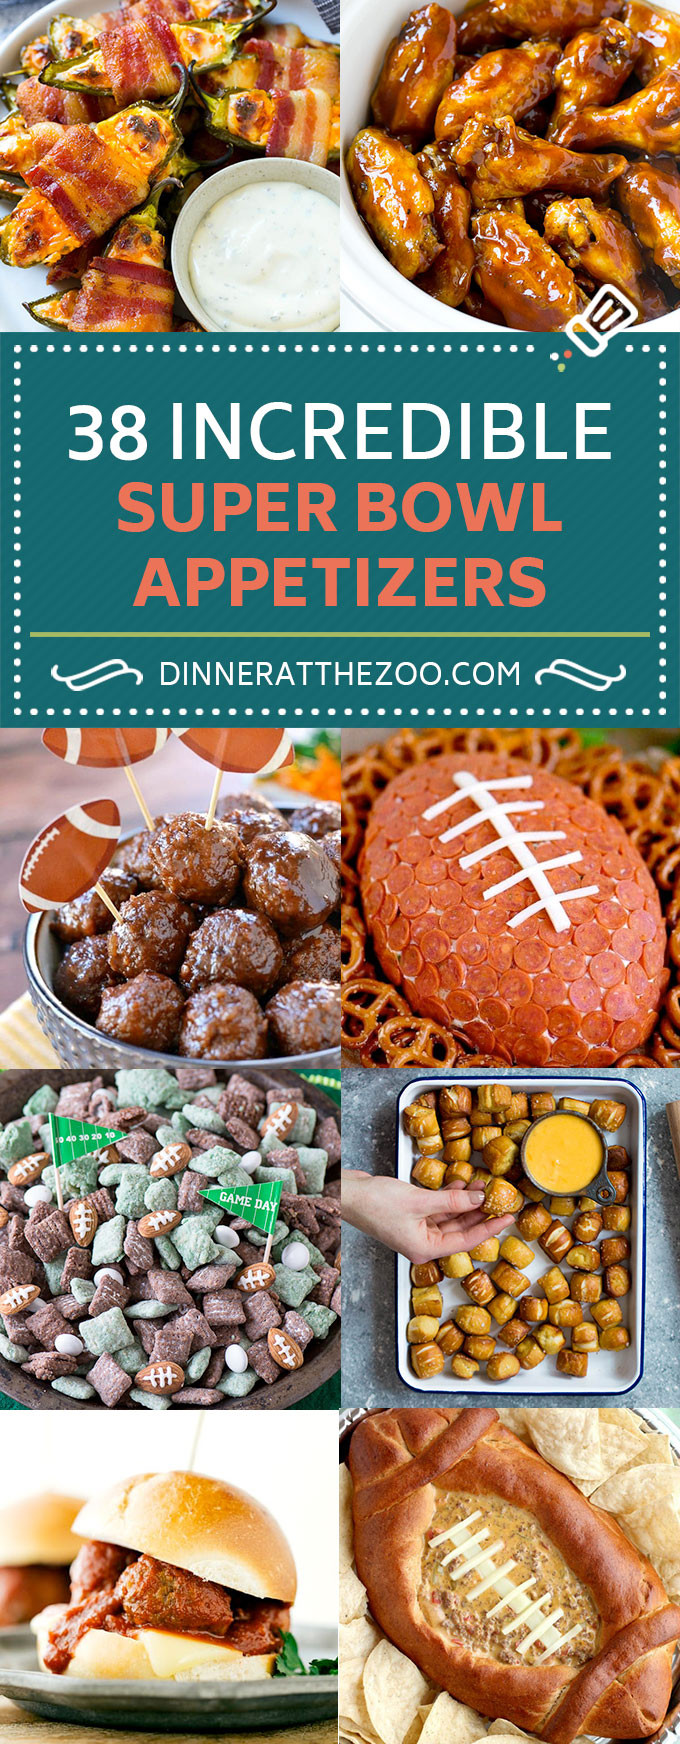 Super Bowl Easy Recipes
 45 Incredible Super Bowl Appetizer Recipes Dinner at the Zoo